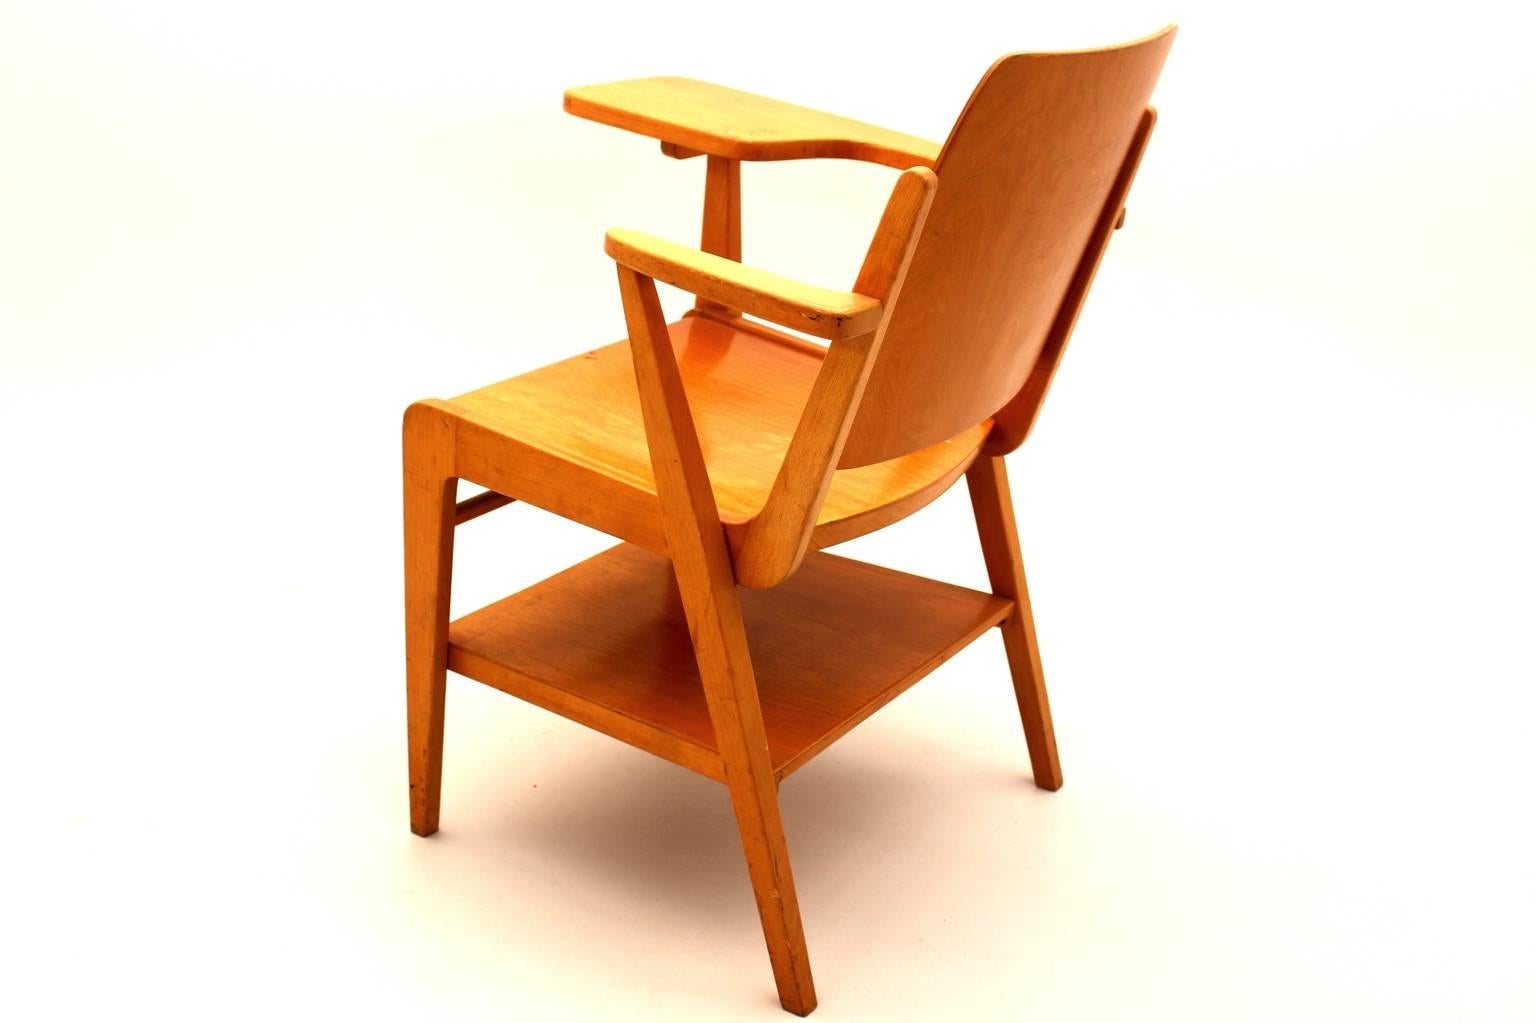 Mid Century Modern brown vintage chair with integrated desk from beech by Franz Schuster for Wiesner - Hager 1959.
While the chair frame was made of solid beechwood, the seat and back were made of plywood.
The great features are a tray under the